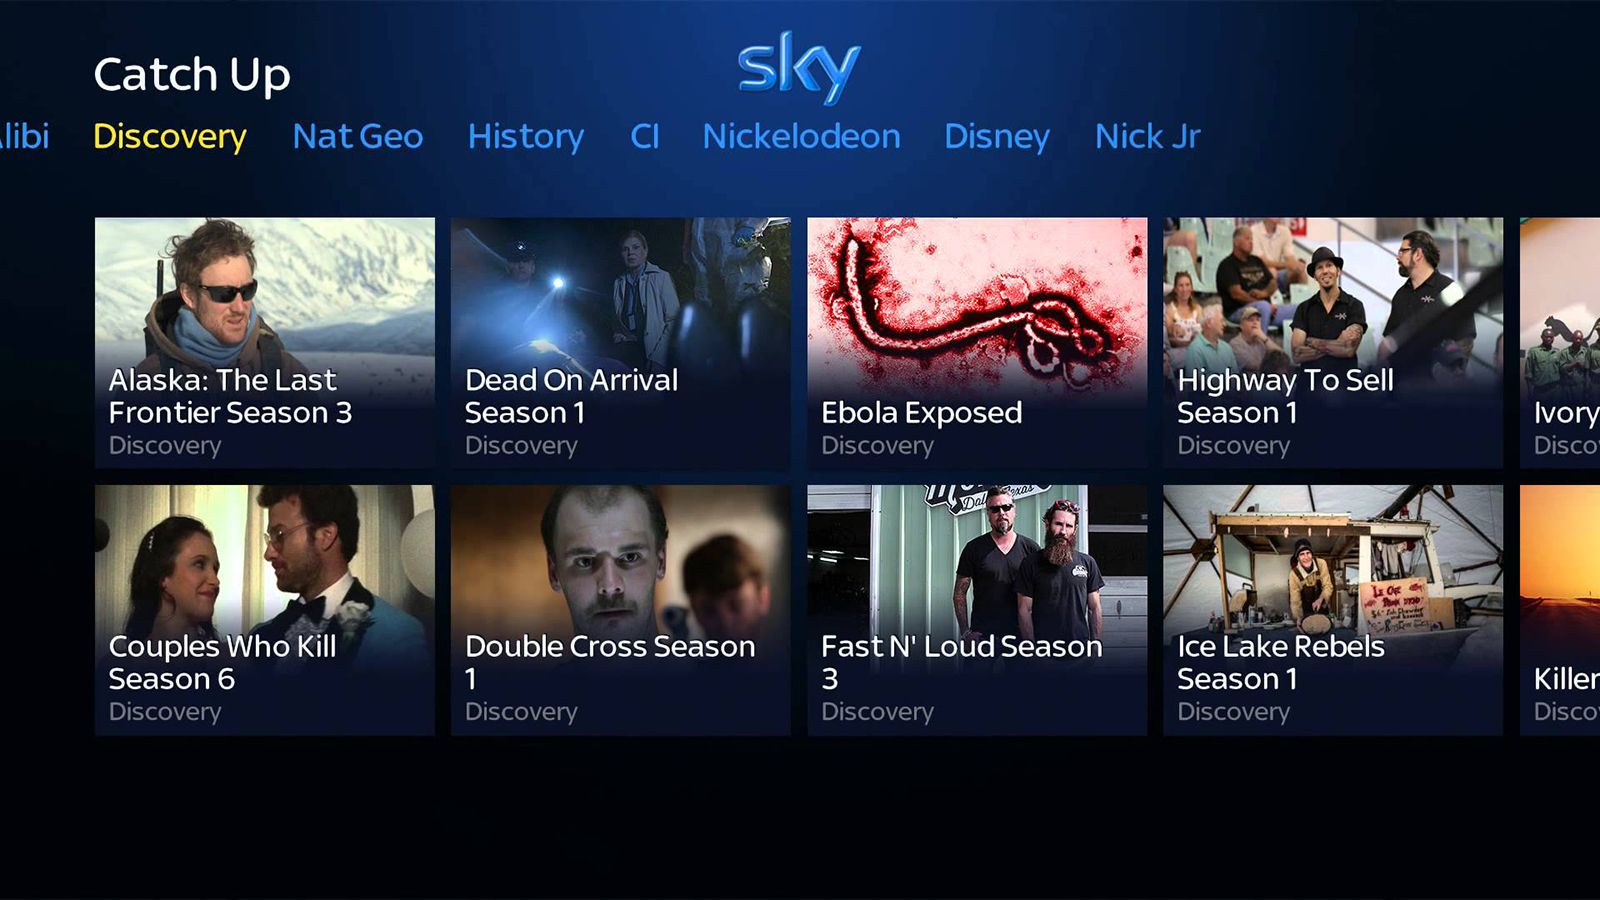 sky go coming to xbox one at last in form of new tv from sky app image 1